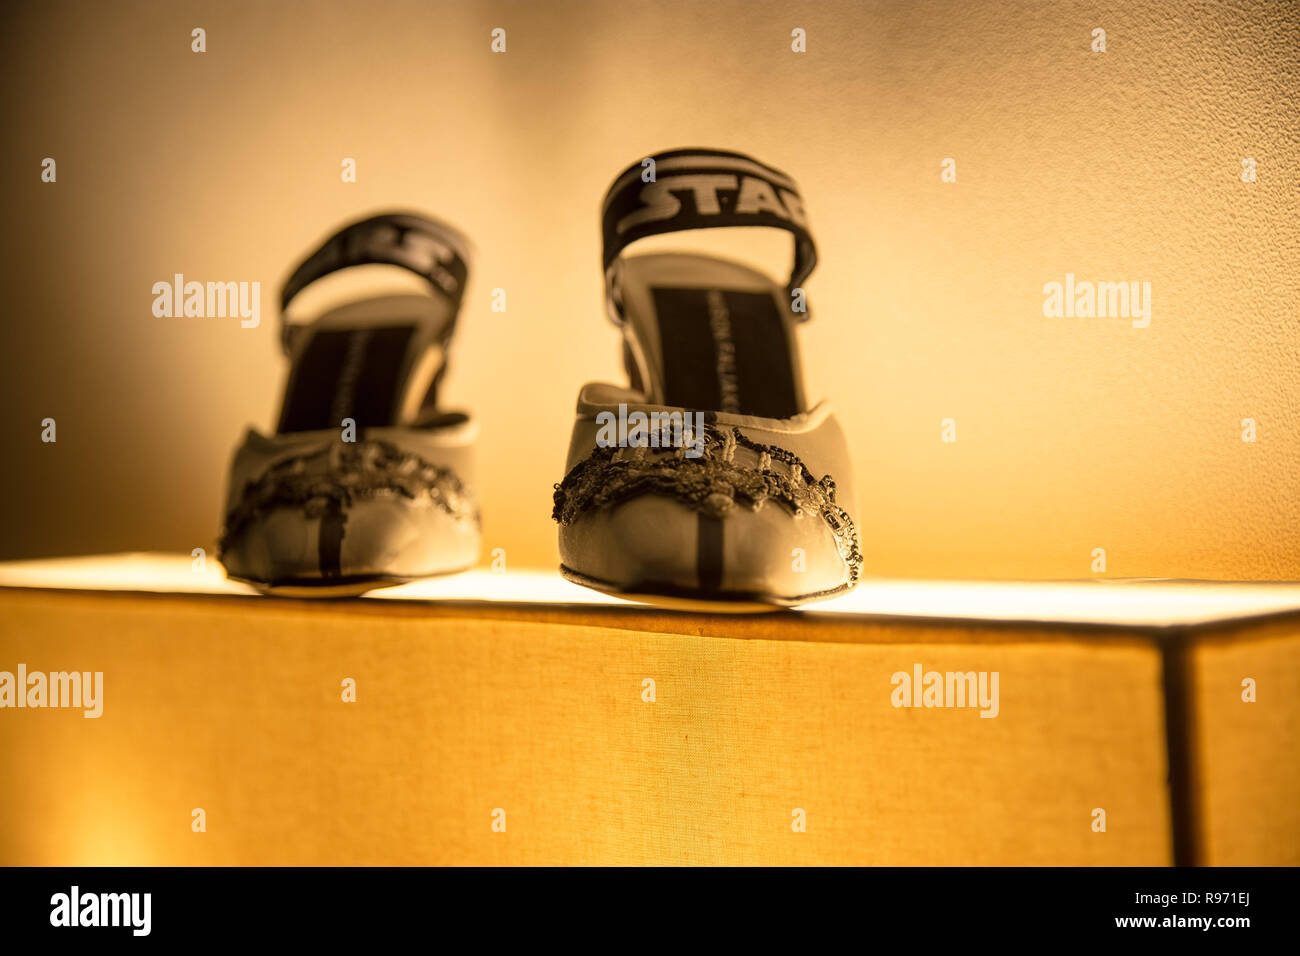 Fila Shoes High Resolution Stock Photography and Images - Alamy